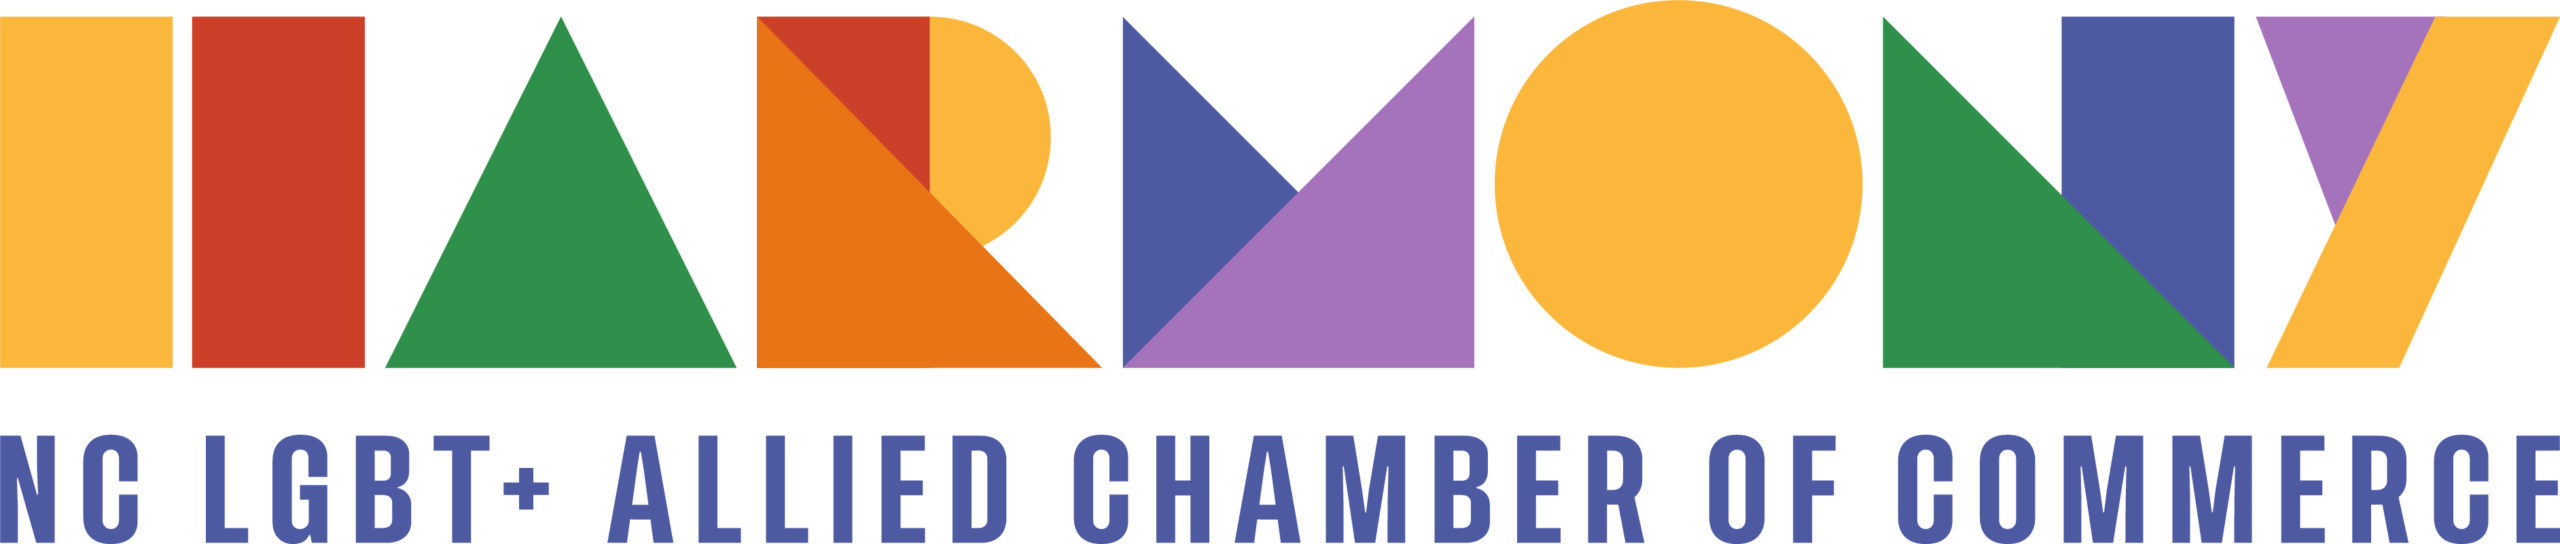 Harmony: NC LGBT+ Allied Chamber of Commerce